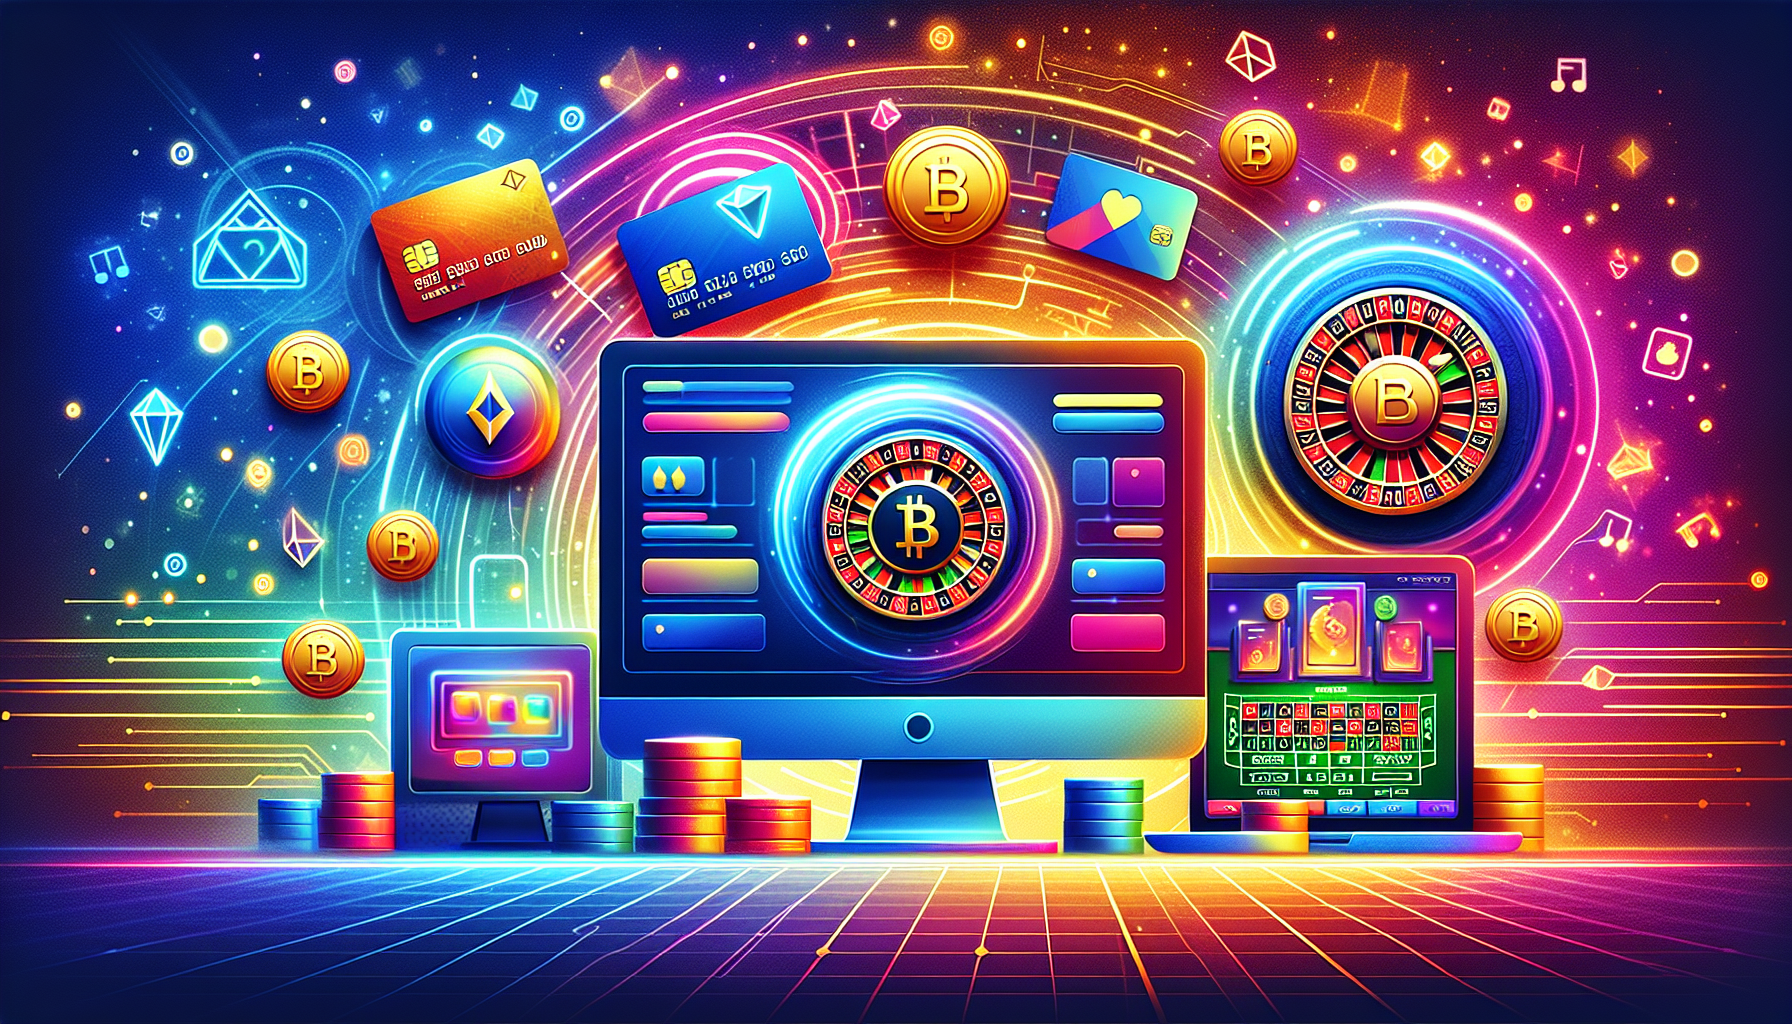 Fast and Secure Payment Options at Casino Site #4